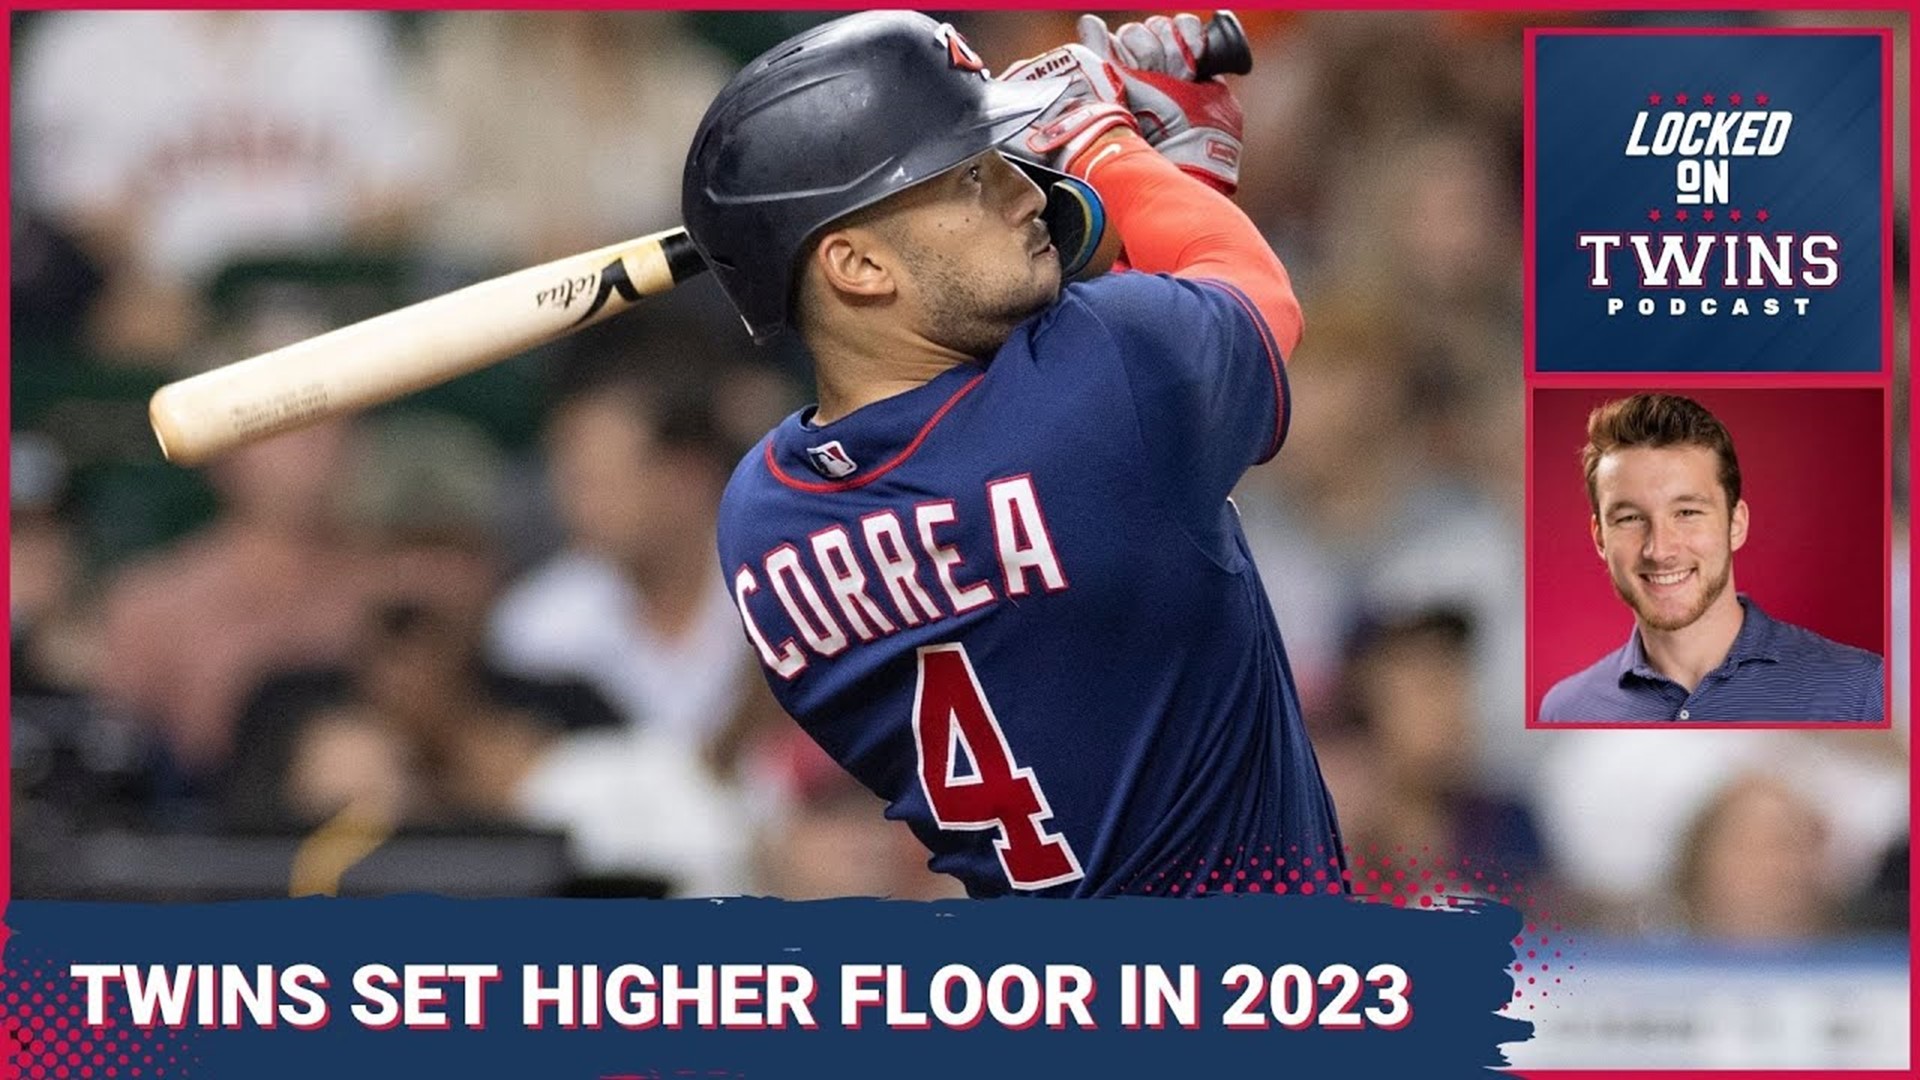 From Kyle Farmer to Michael A. Taylor to Pablo López, the Twins are working to avoid the injury-plagued depth problems from 2022.